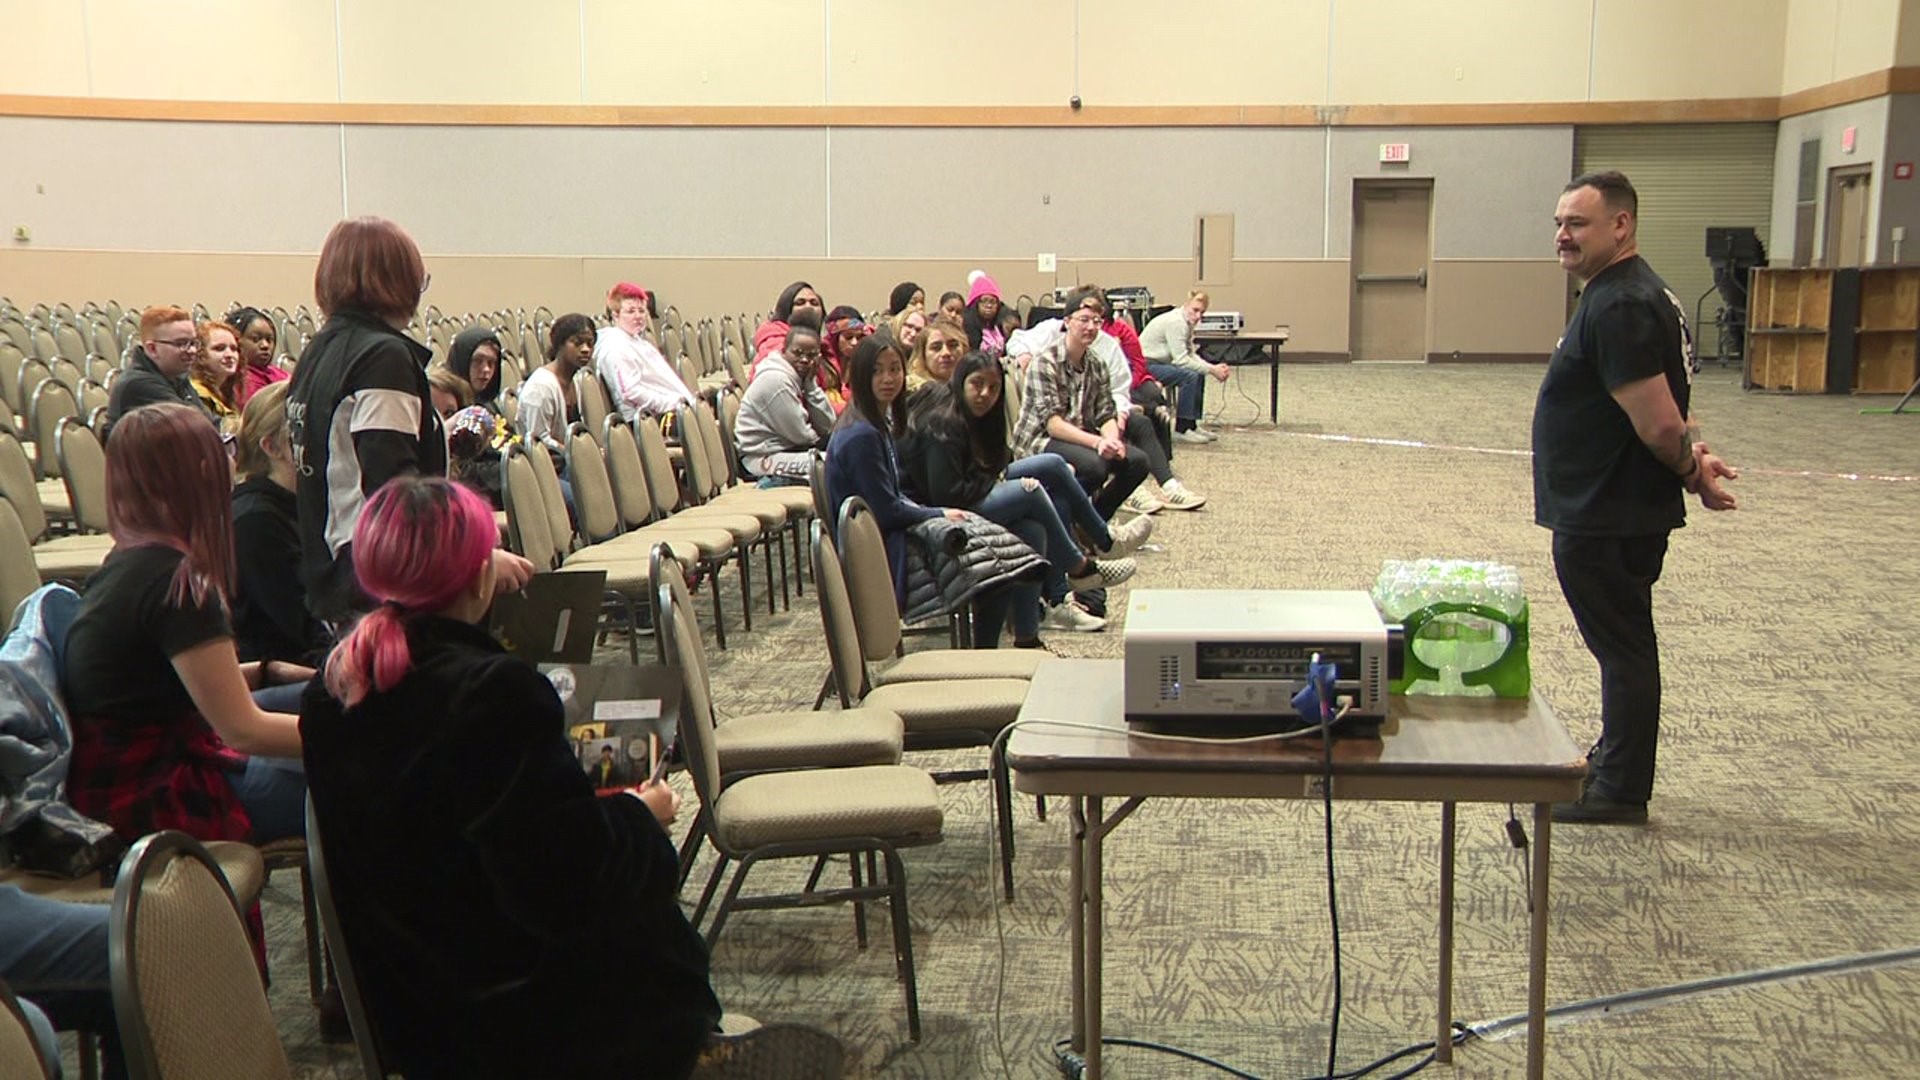 Some of the problems teens talked about include challenges at home, social media and bullying.